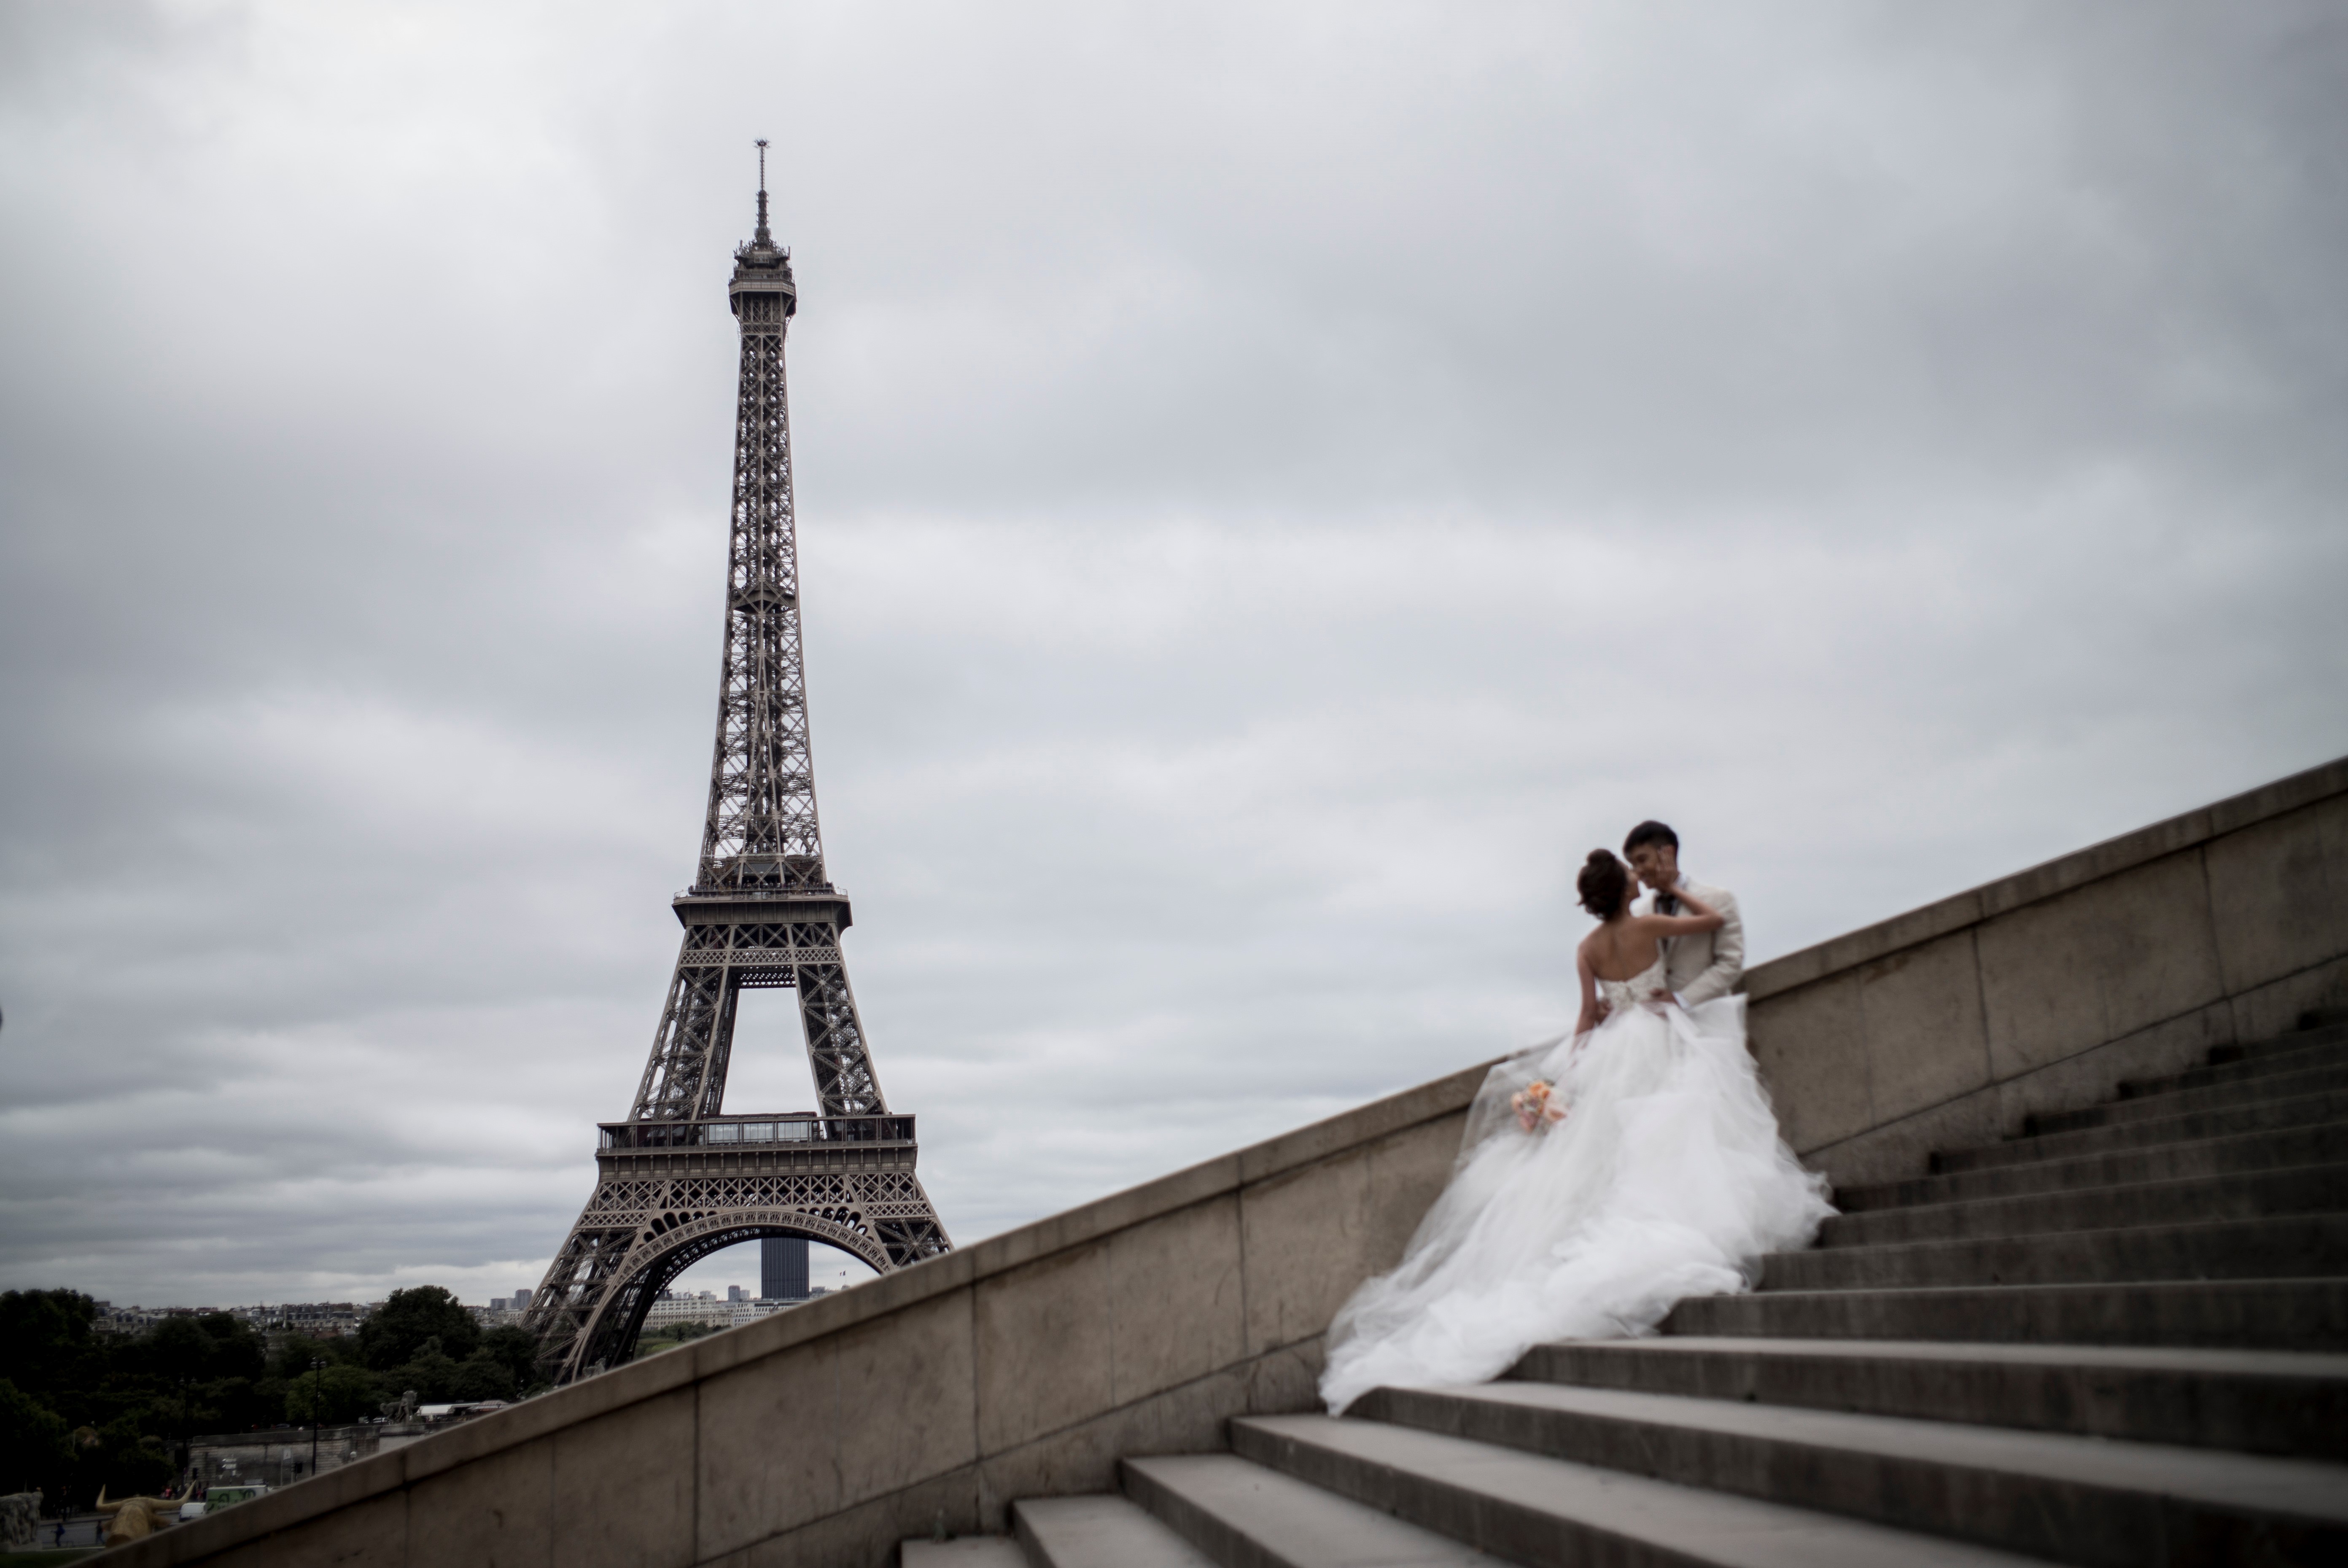 A young married couple kisses in front of the Eiffel Tower in Paris on September 29, 2016. (PHILIPPE LOPEZ/AFP via Getty Images)